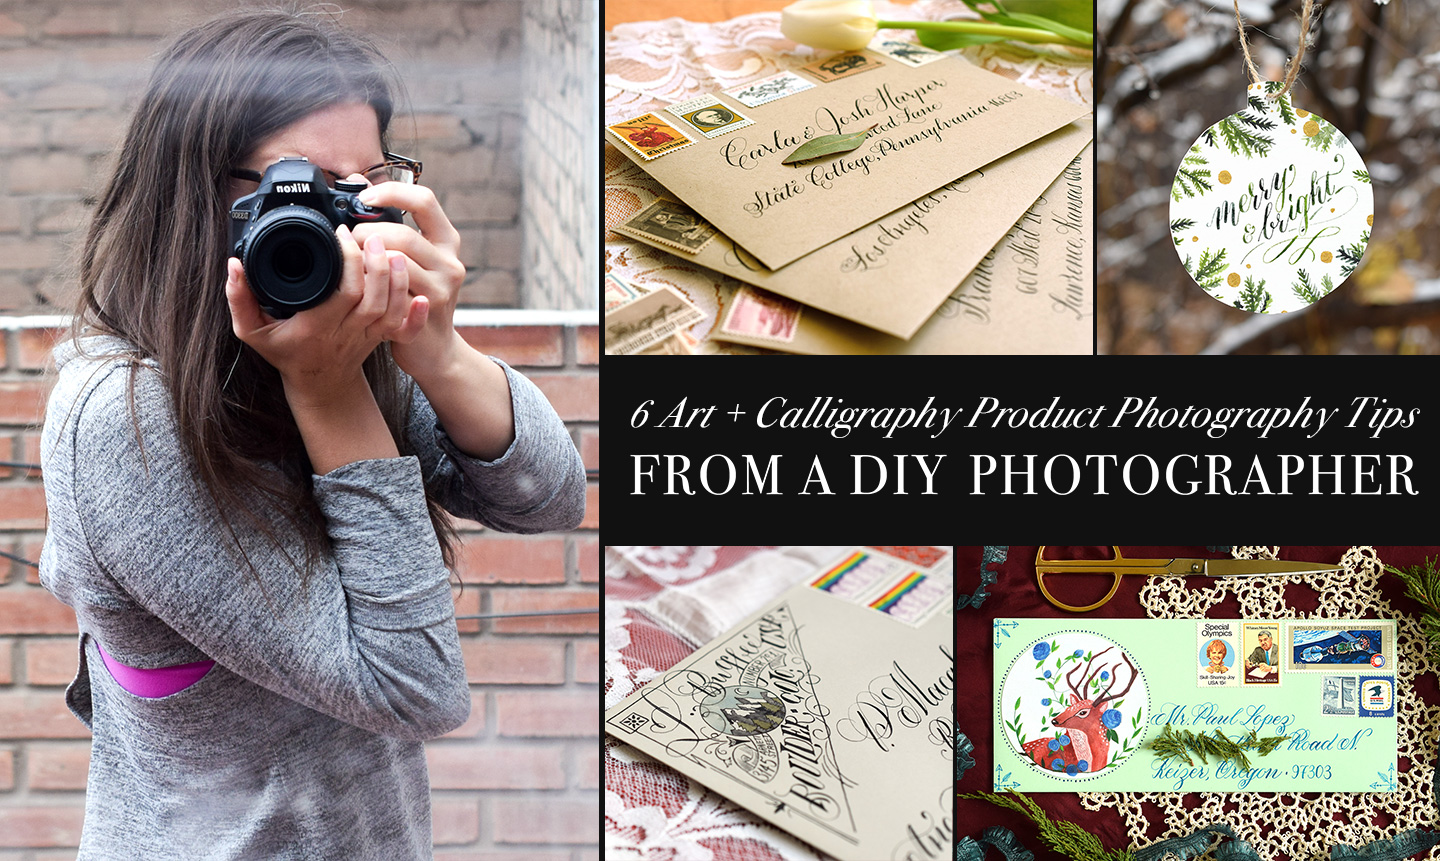 6 Art + Calligraphy Product Photography Tips from a DIY Photographer